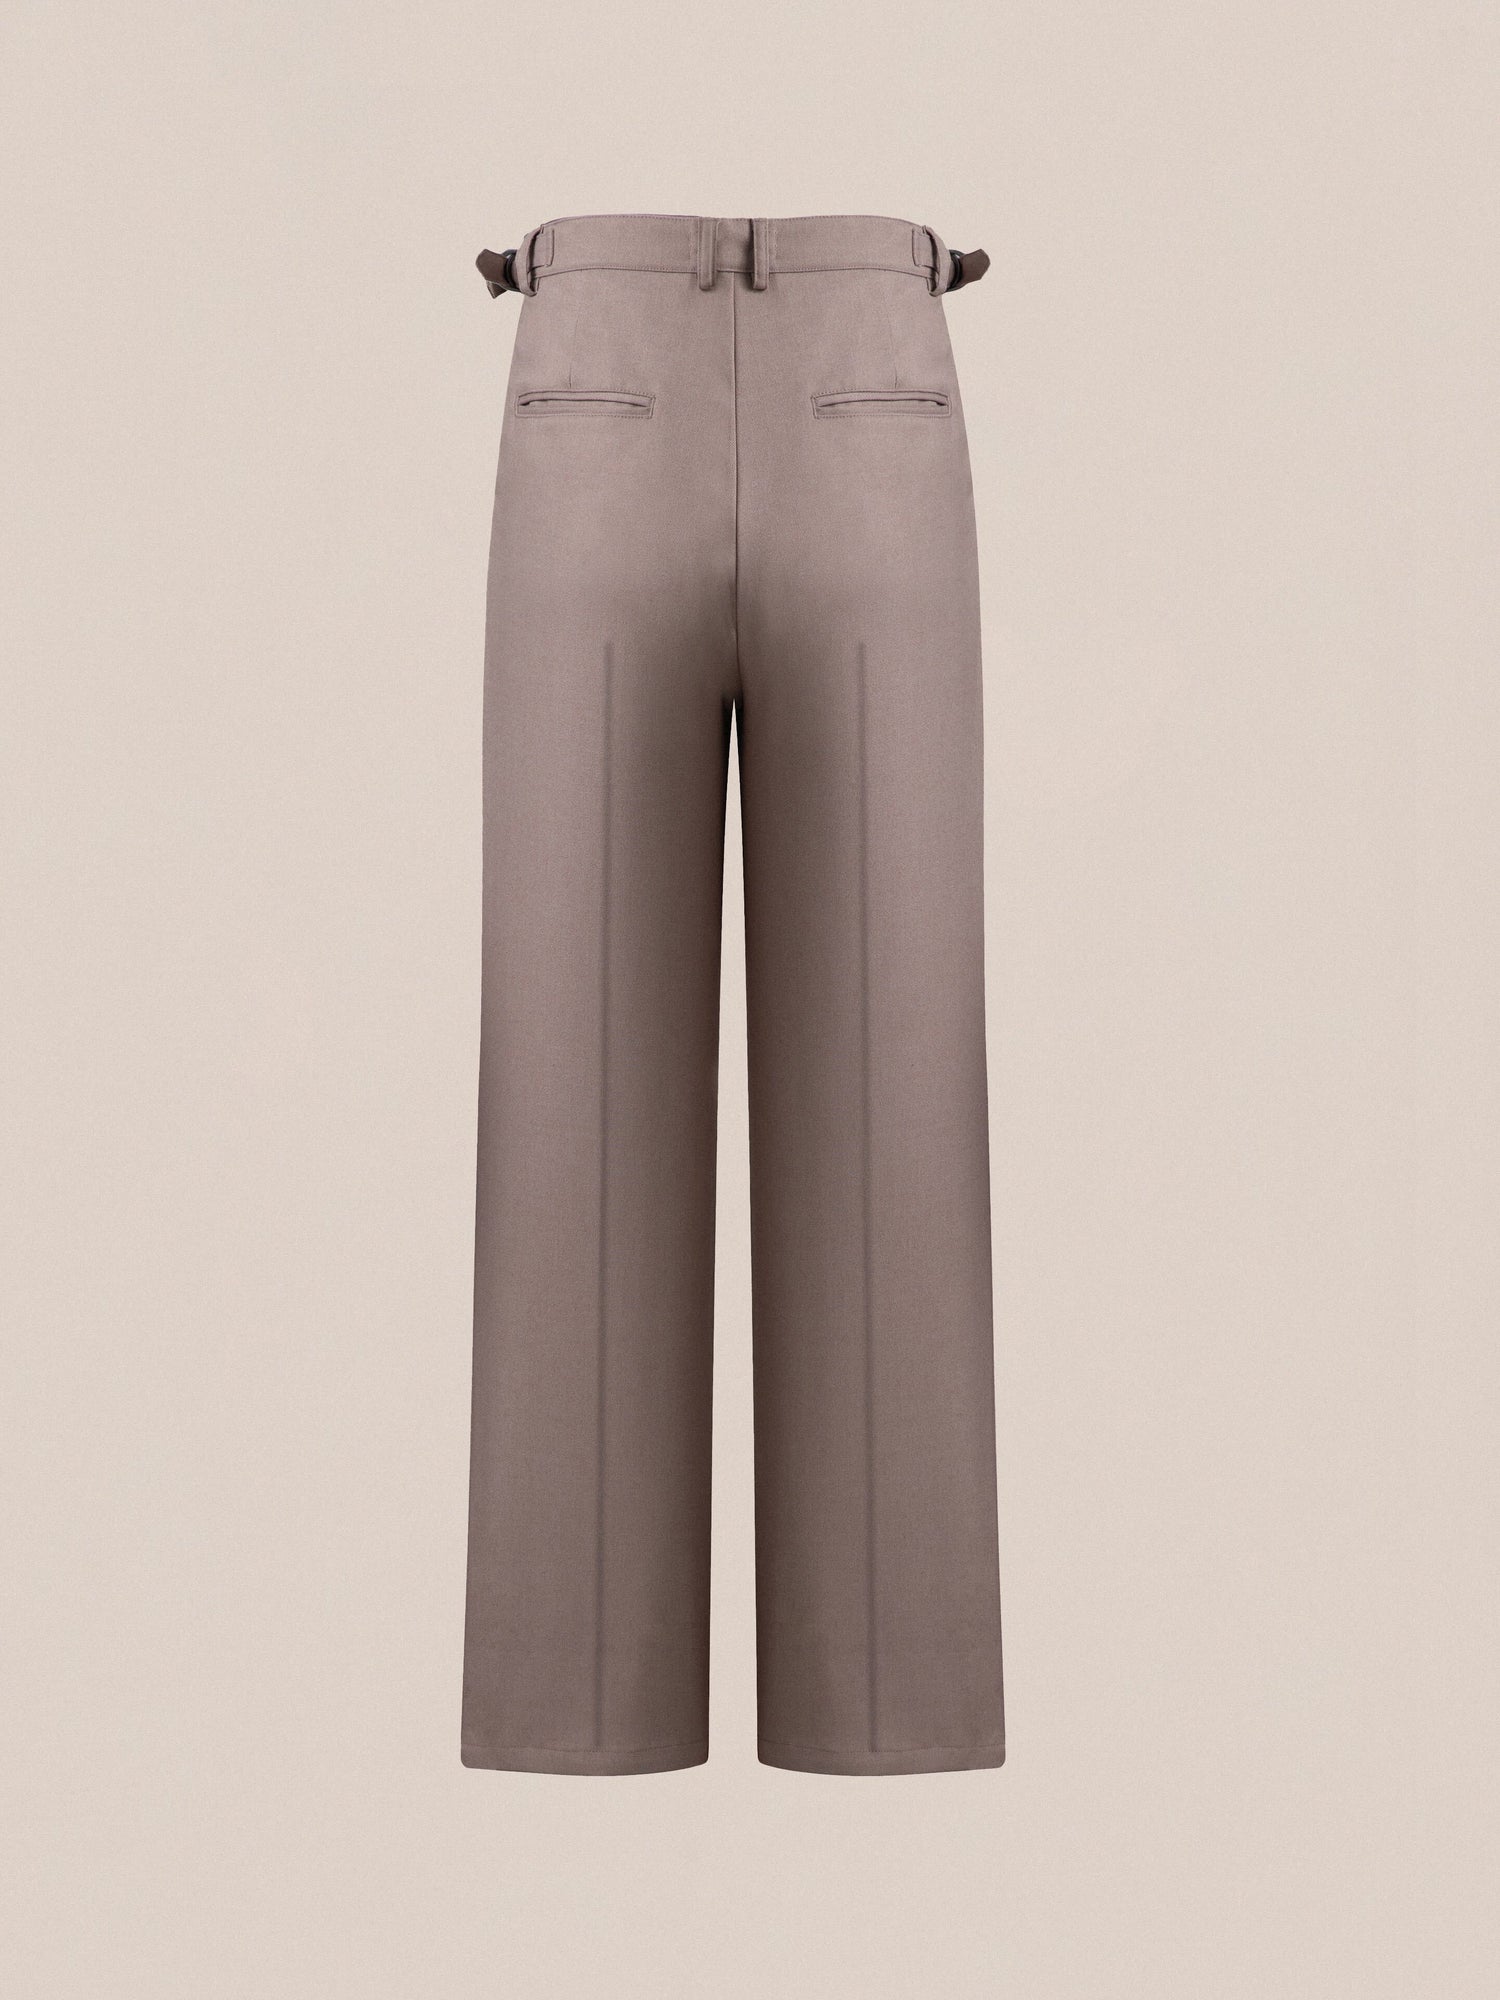 Taupe high-waisted wide-leg double pleated trousers with belt detail by Found.